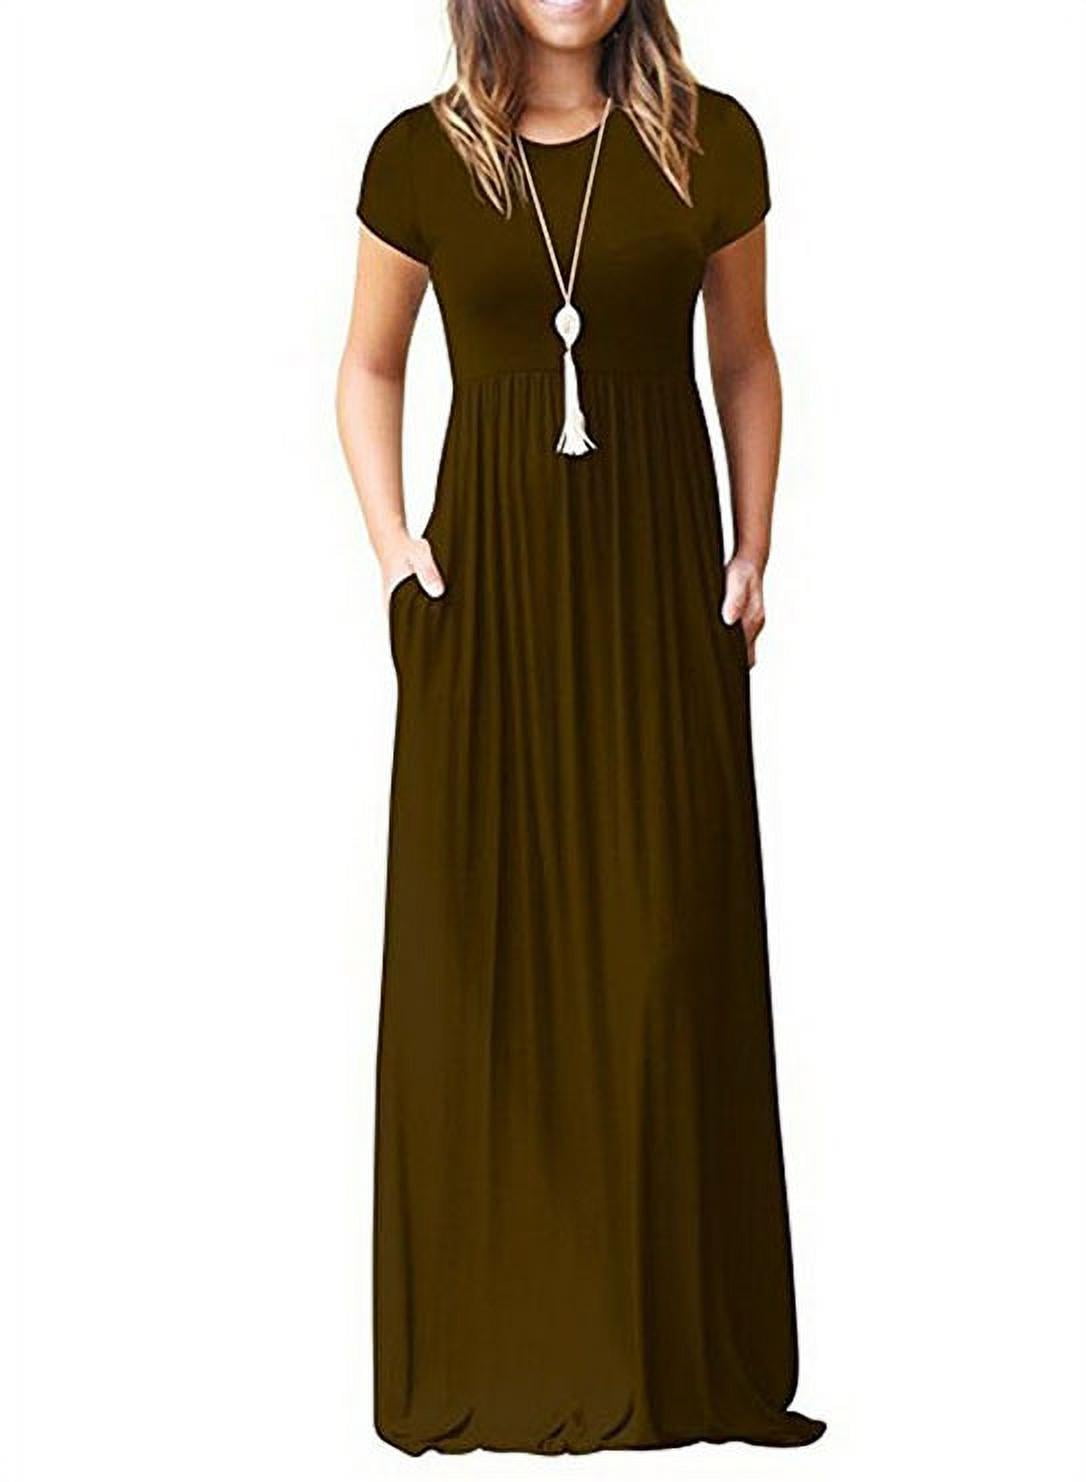 Casual Long Dress for Women Solid Color Short Sleeve Maxi Dress with ...